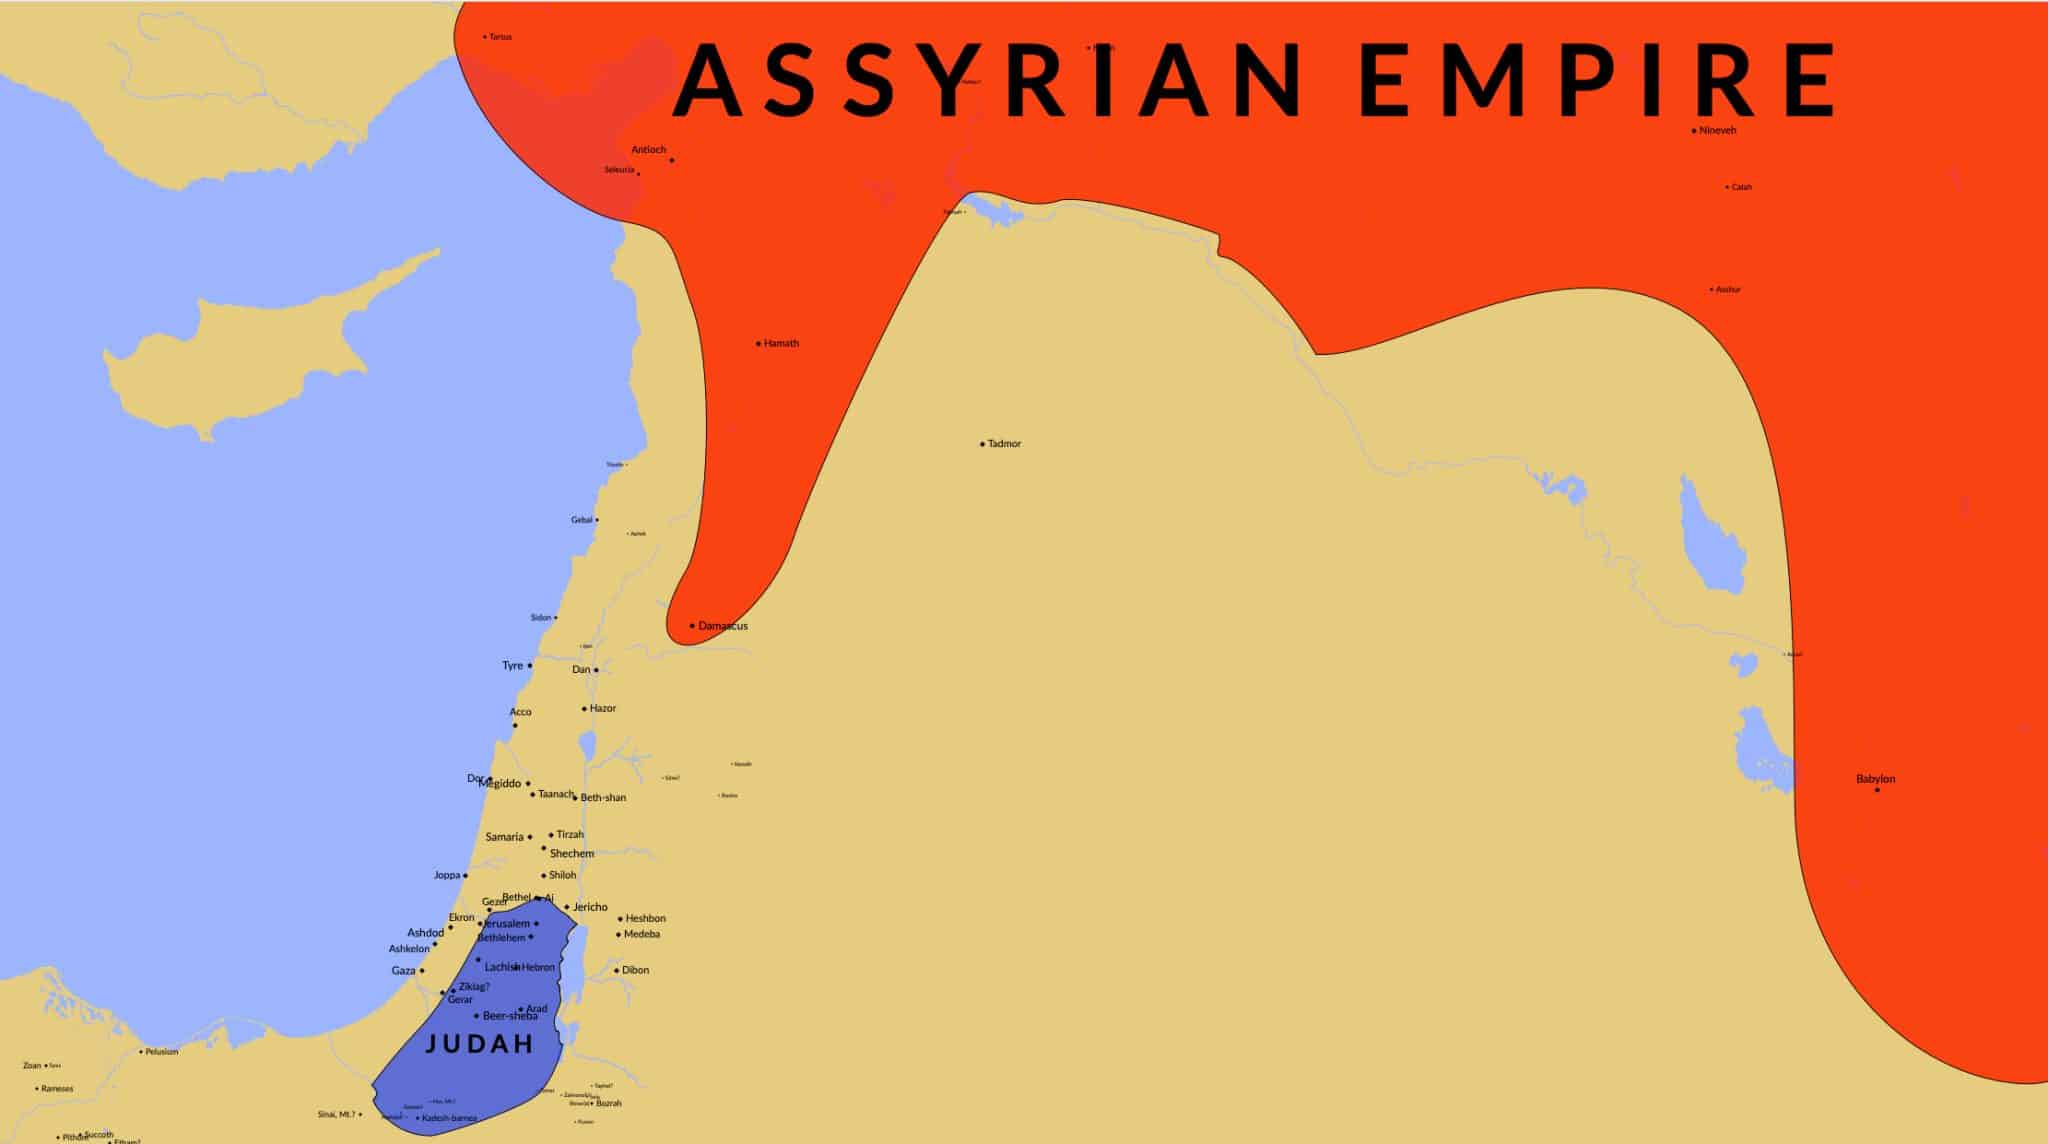 Assyrian empire takes over.